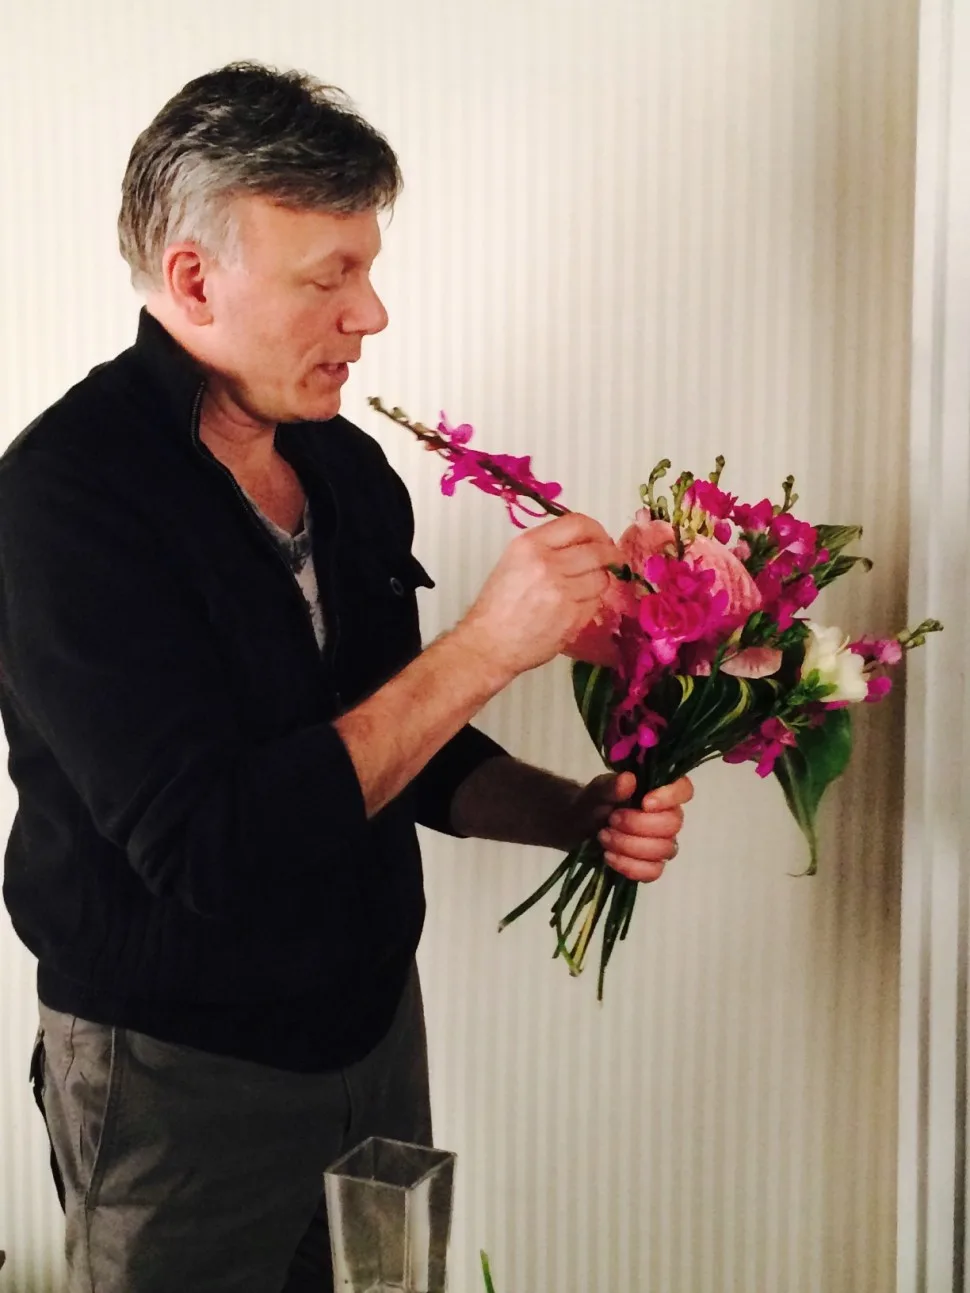 The Lawyer Learns Flowers: Valentine’s Day Edition